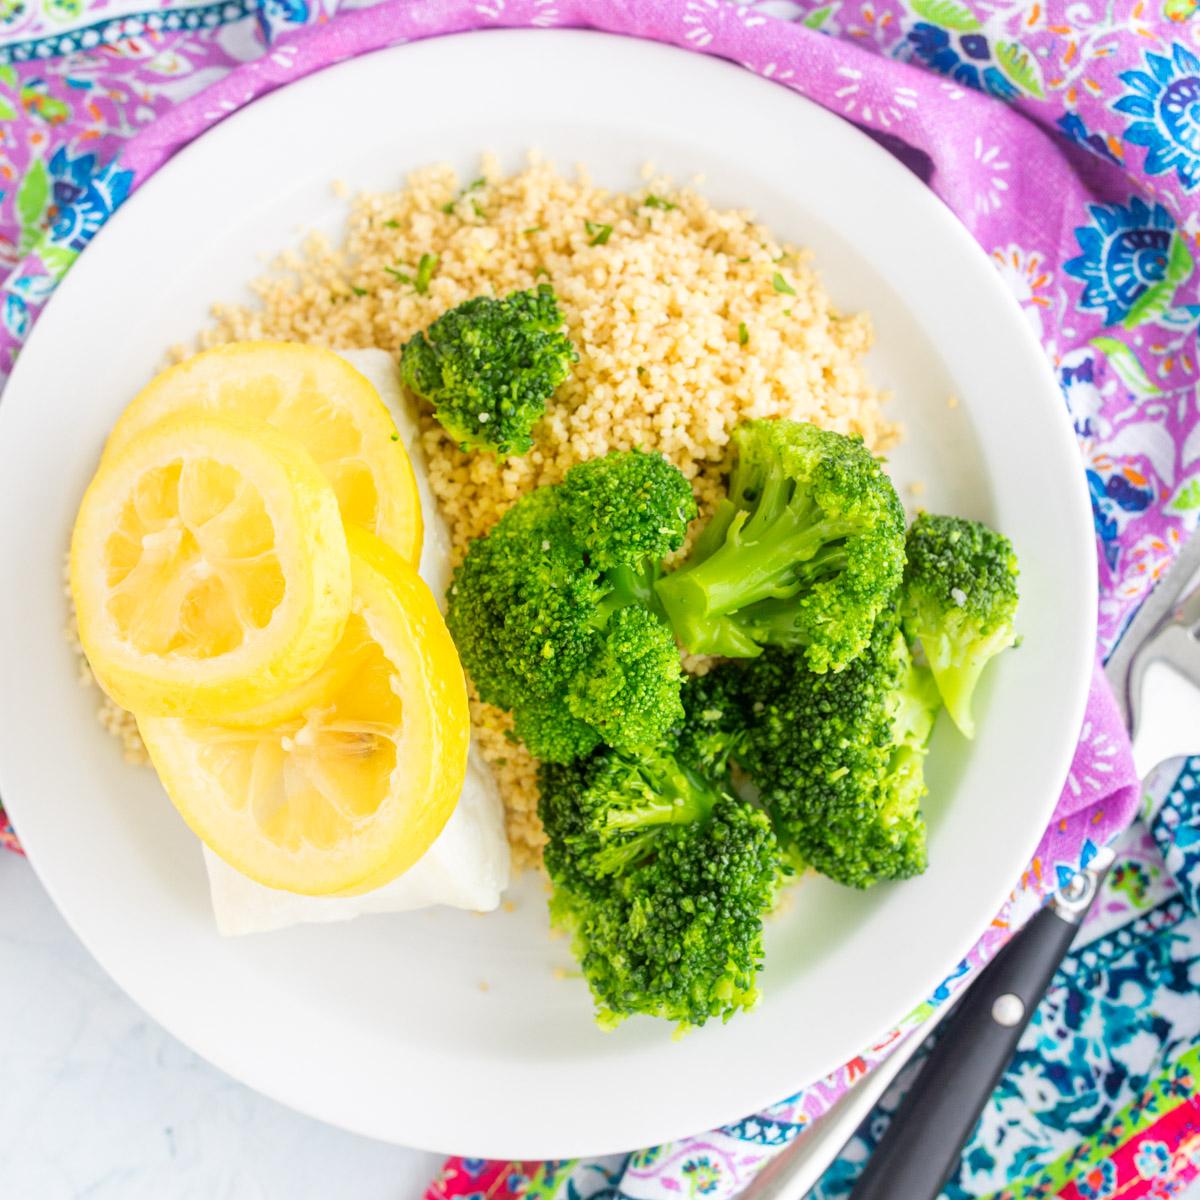 cod with lemon on top next to couscous and broccoli